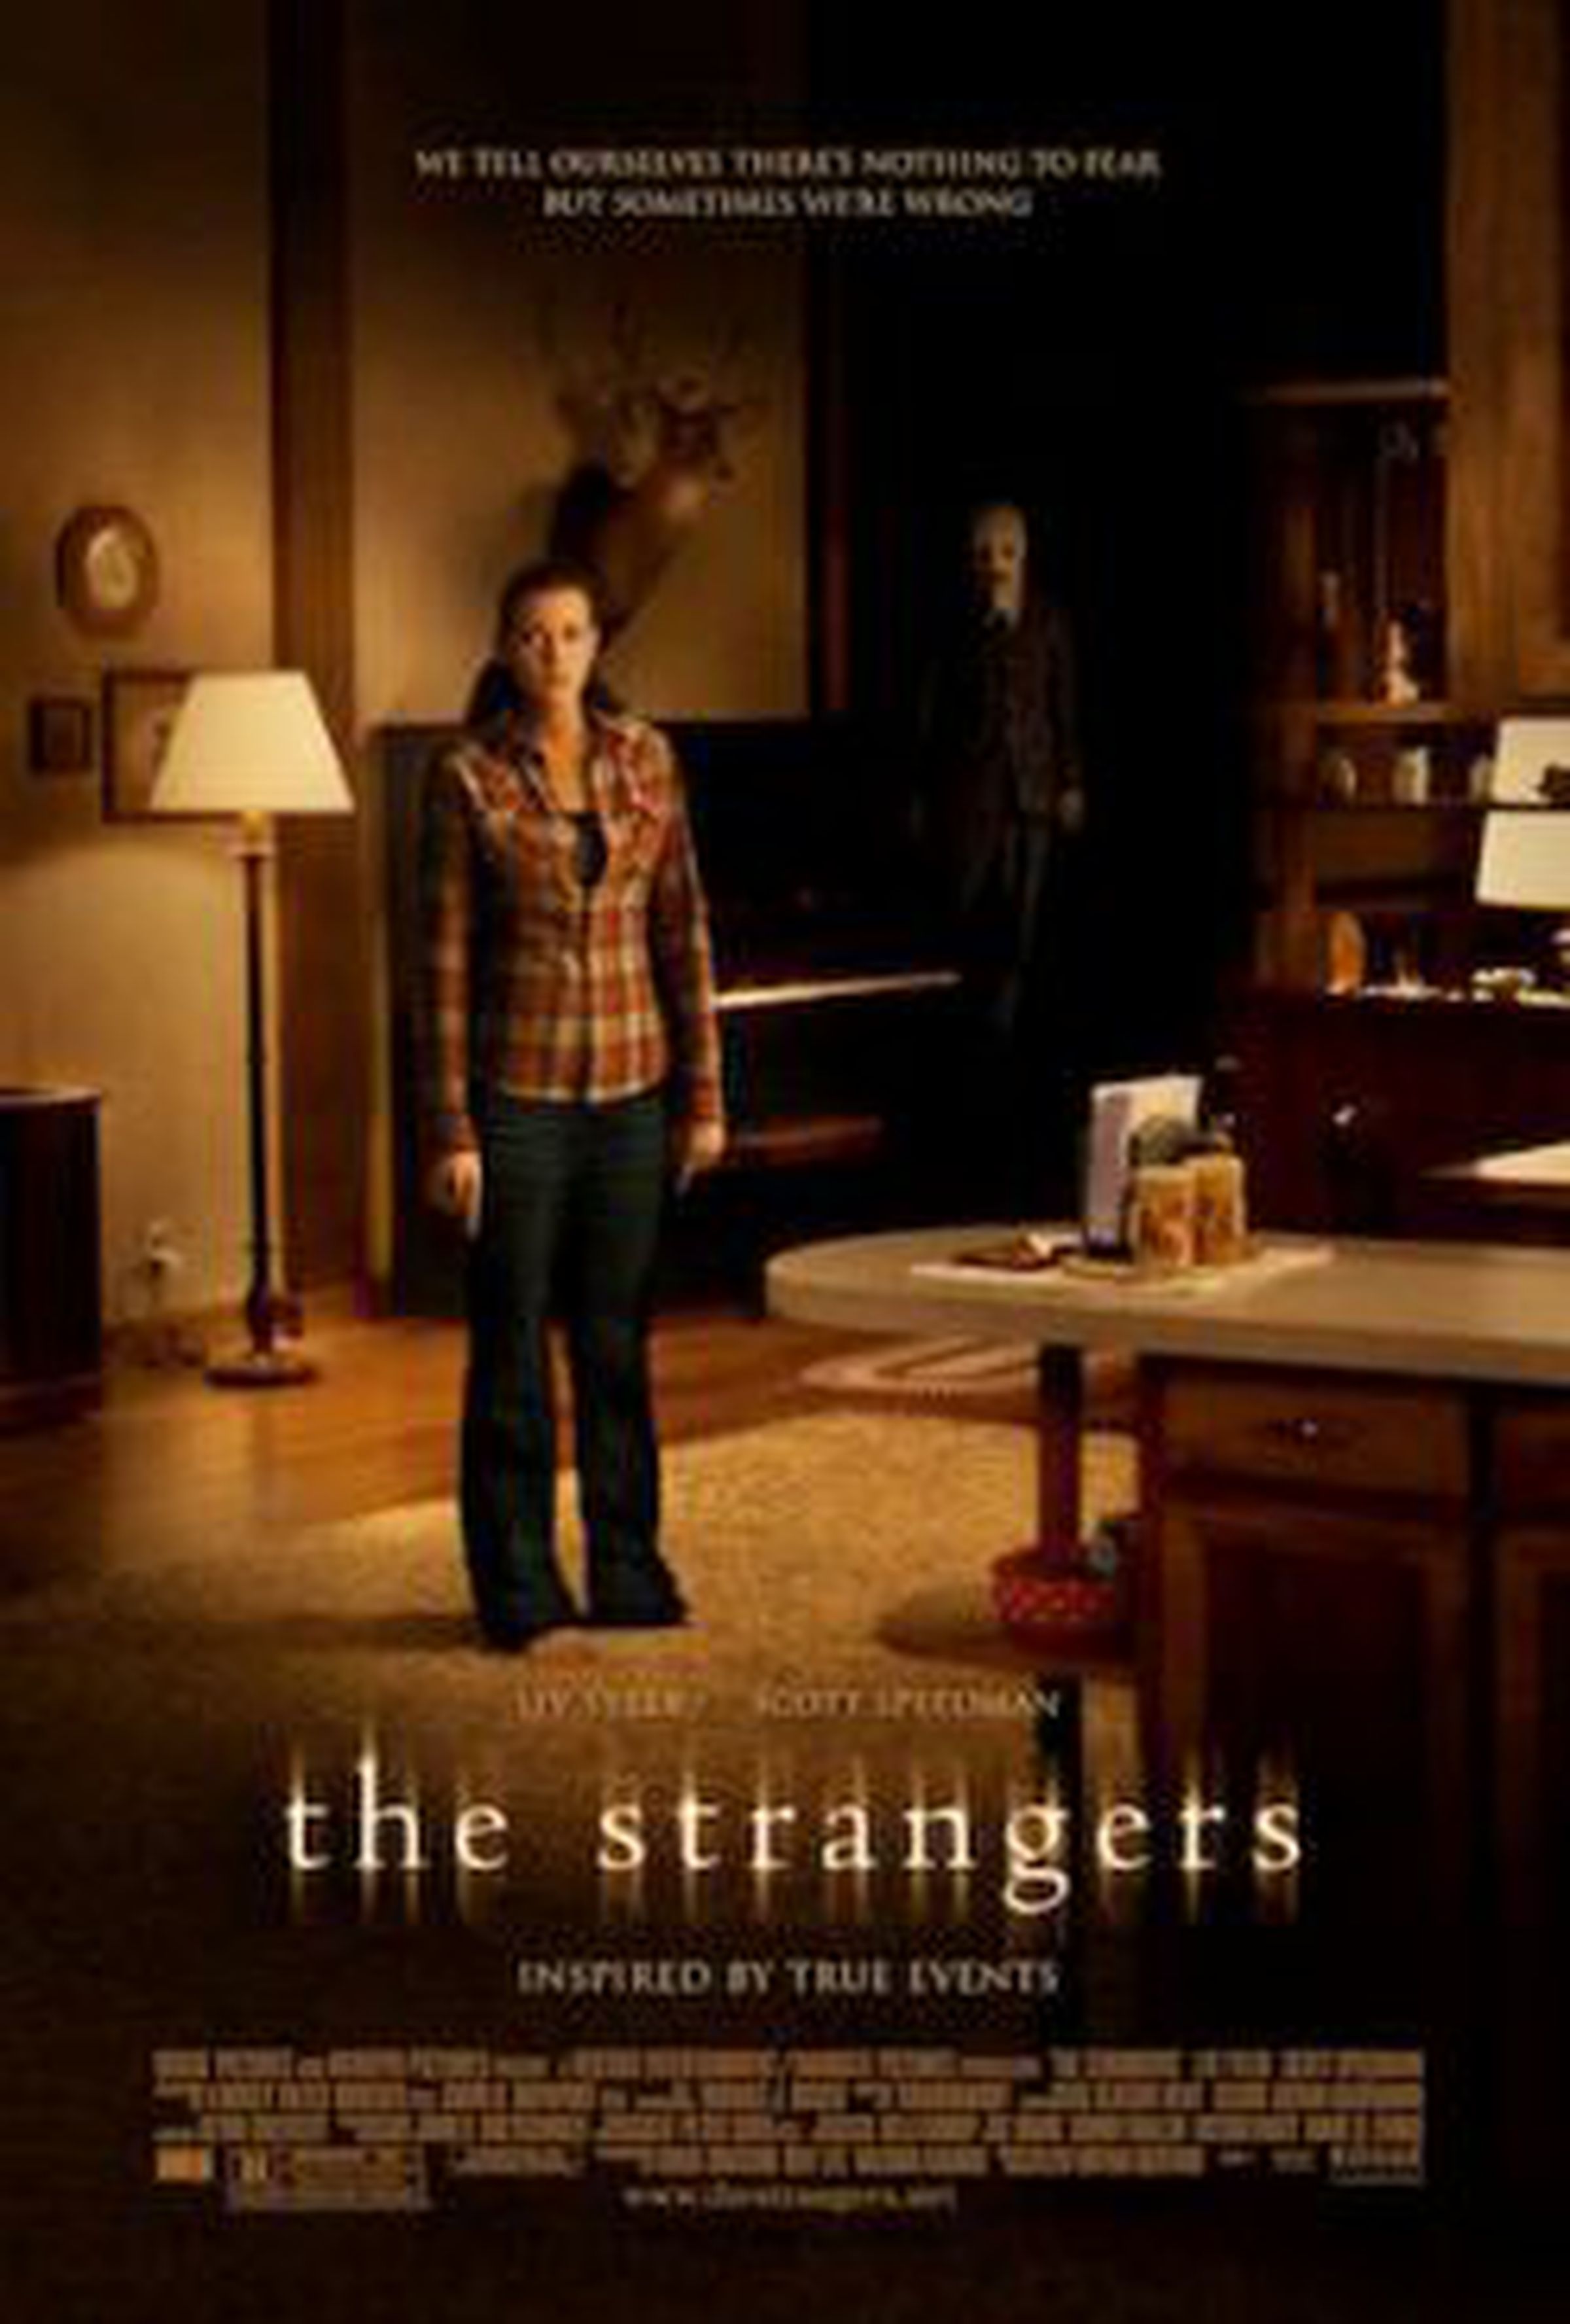 Movie poster showing a woman in a living room with a weird stranger entering the room, and the name of the movie The Strangers, with credits